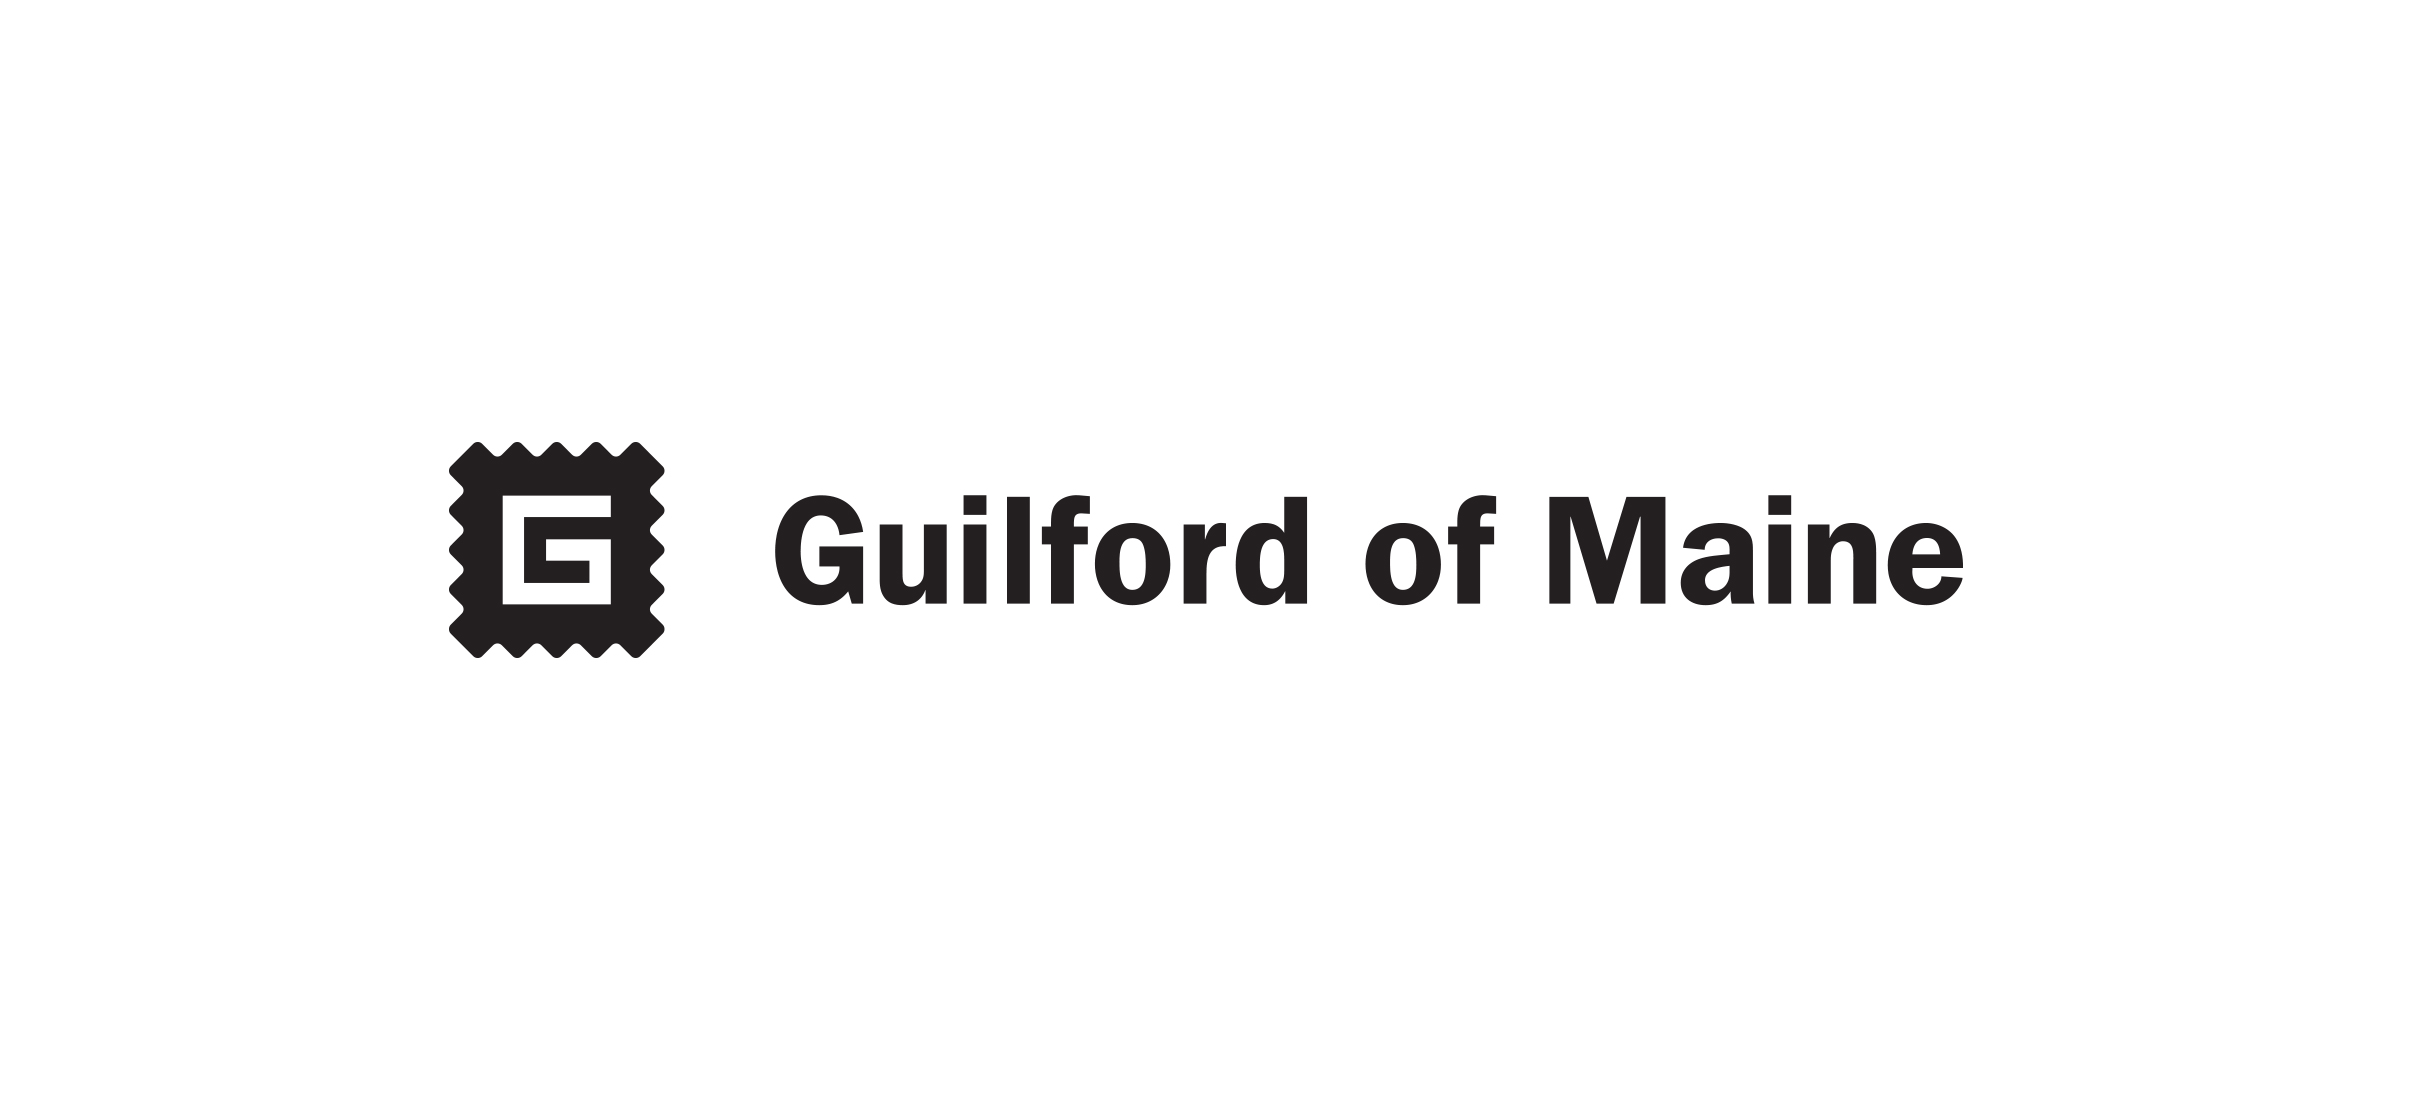 guilford of maine.jpg